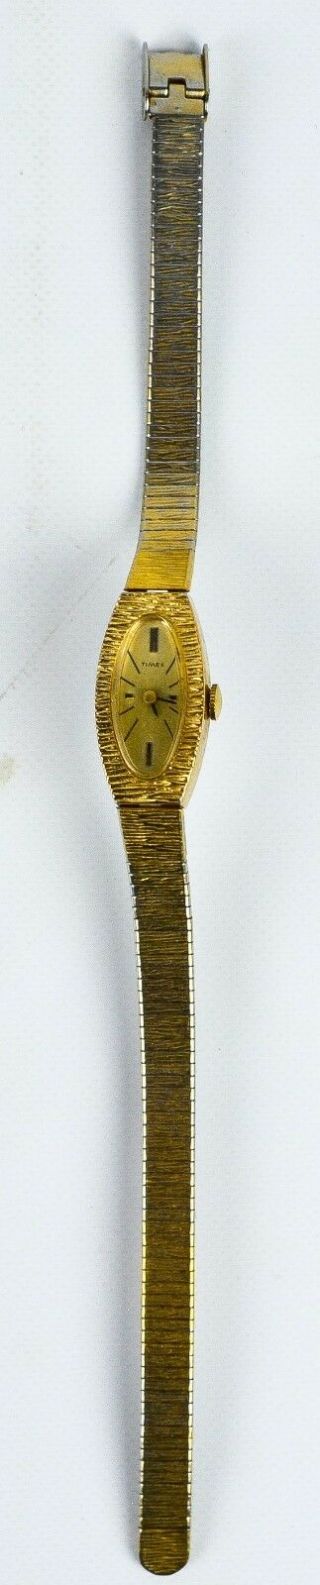 Timex Women ' s Watch Wristwatch Wind Up Gold Oval Very Old,  Vintage And Classy 3